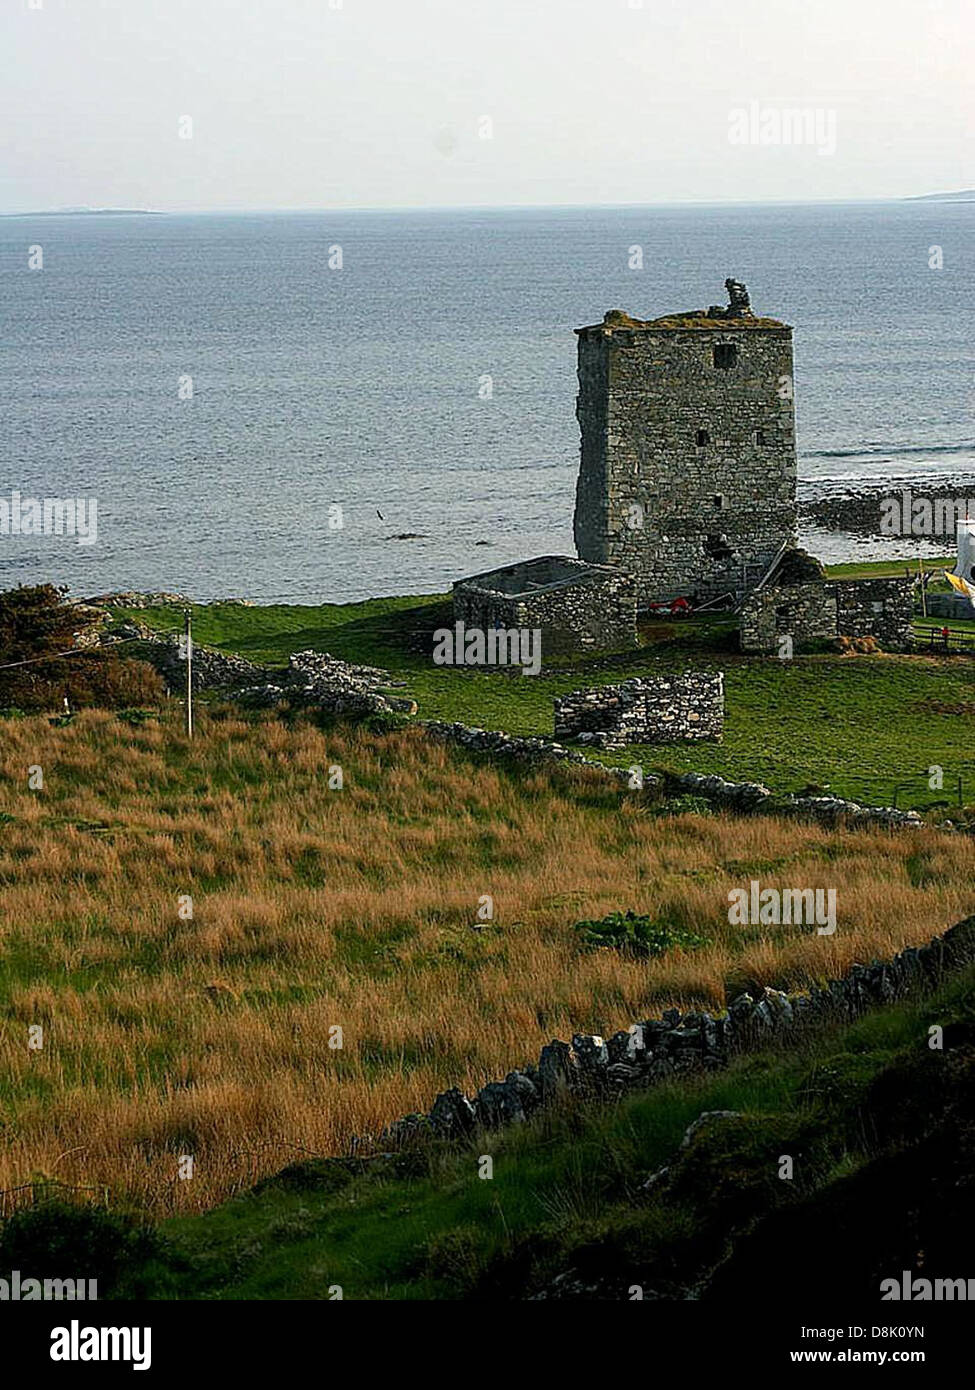 Renvyle castle in county galway ireland near tully cross. Stock Photo